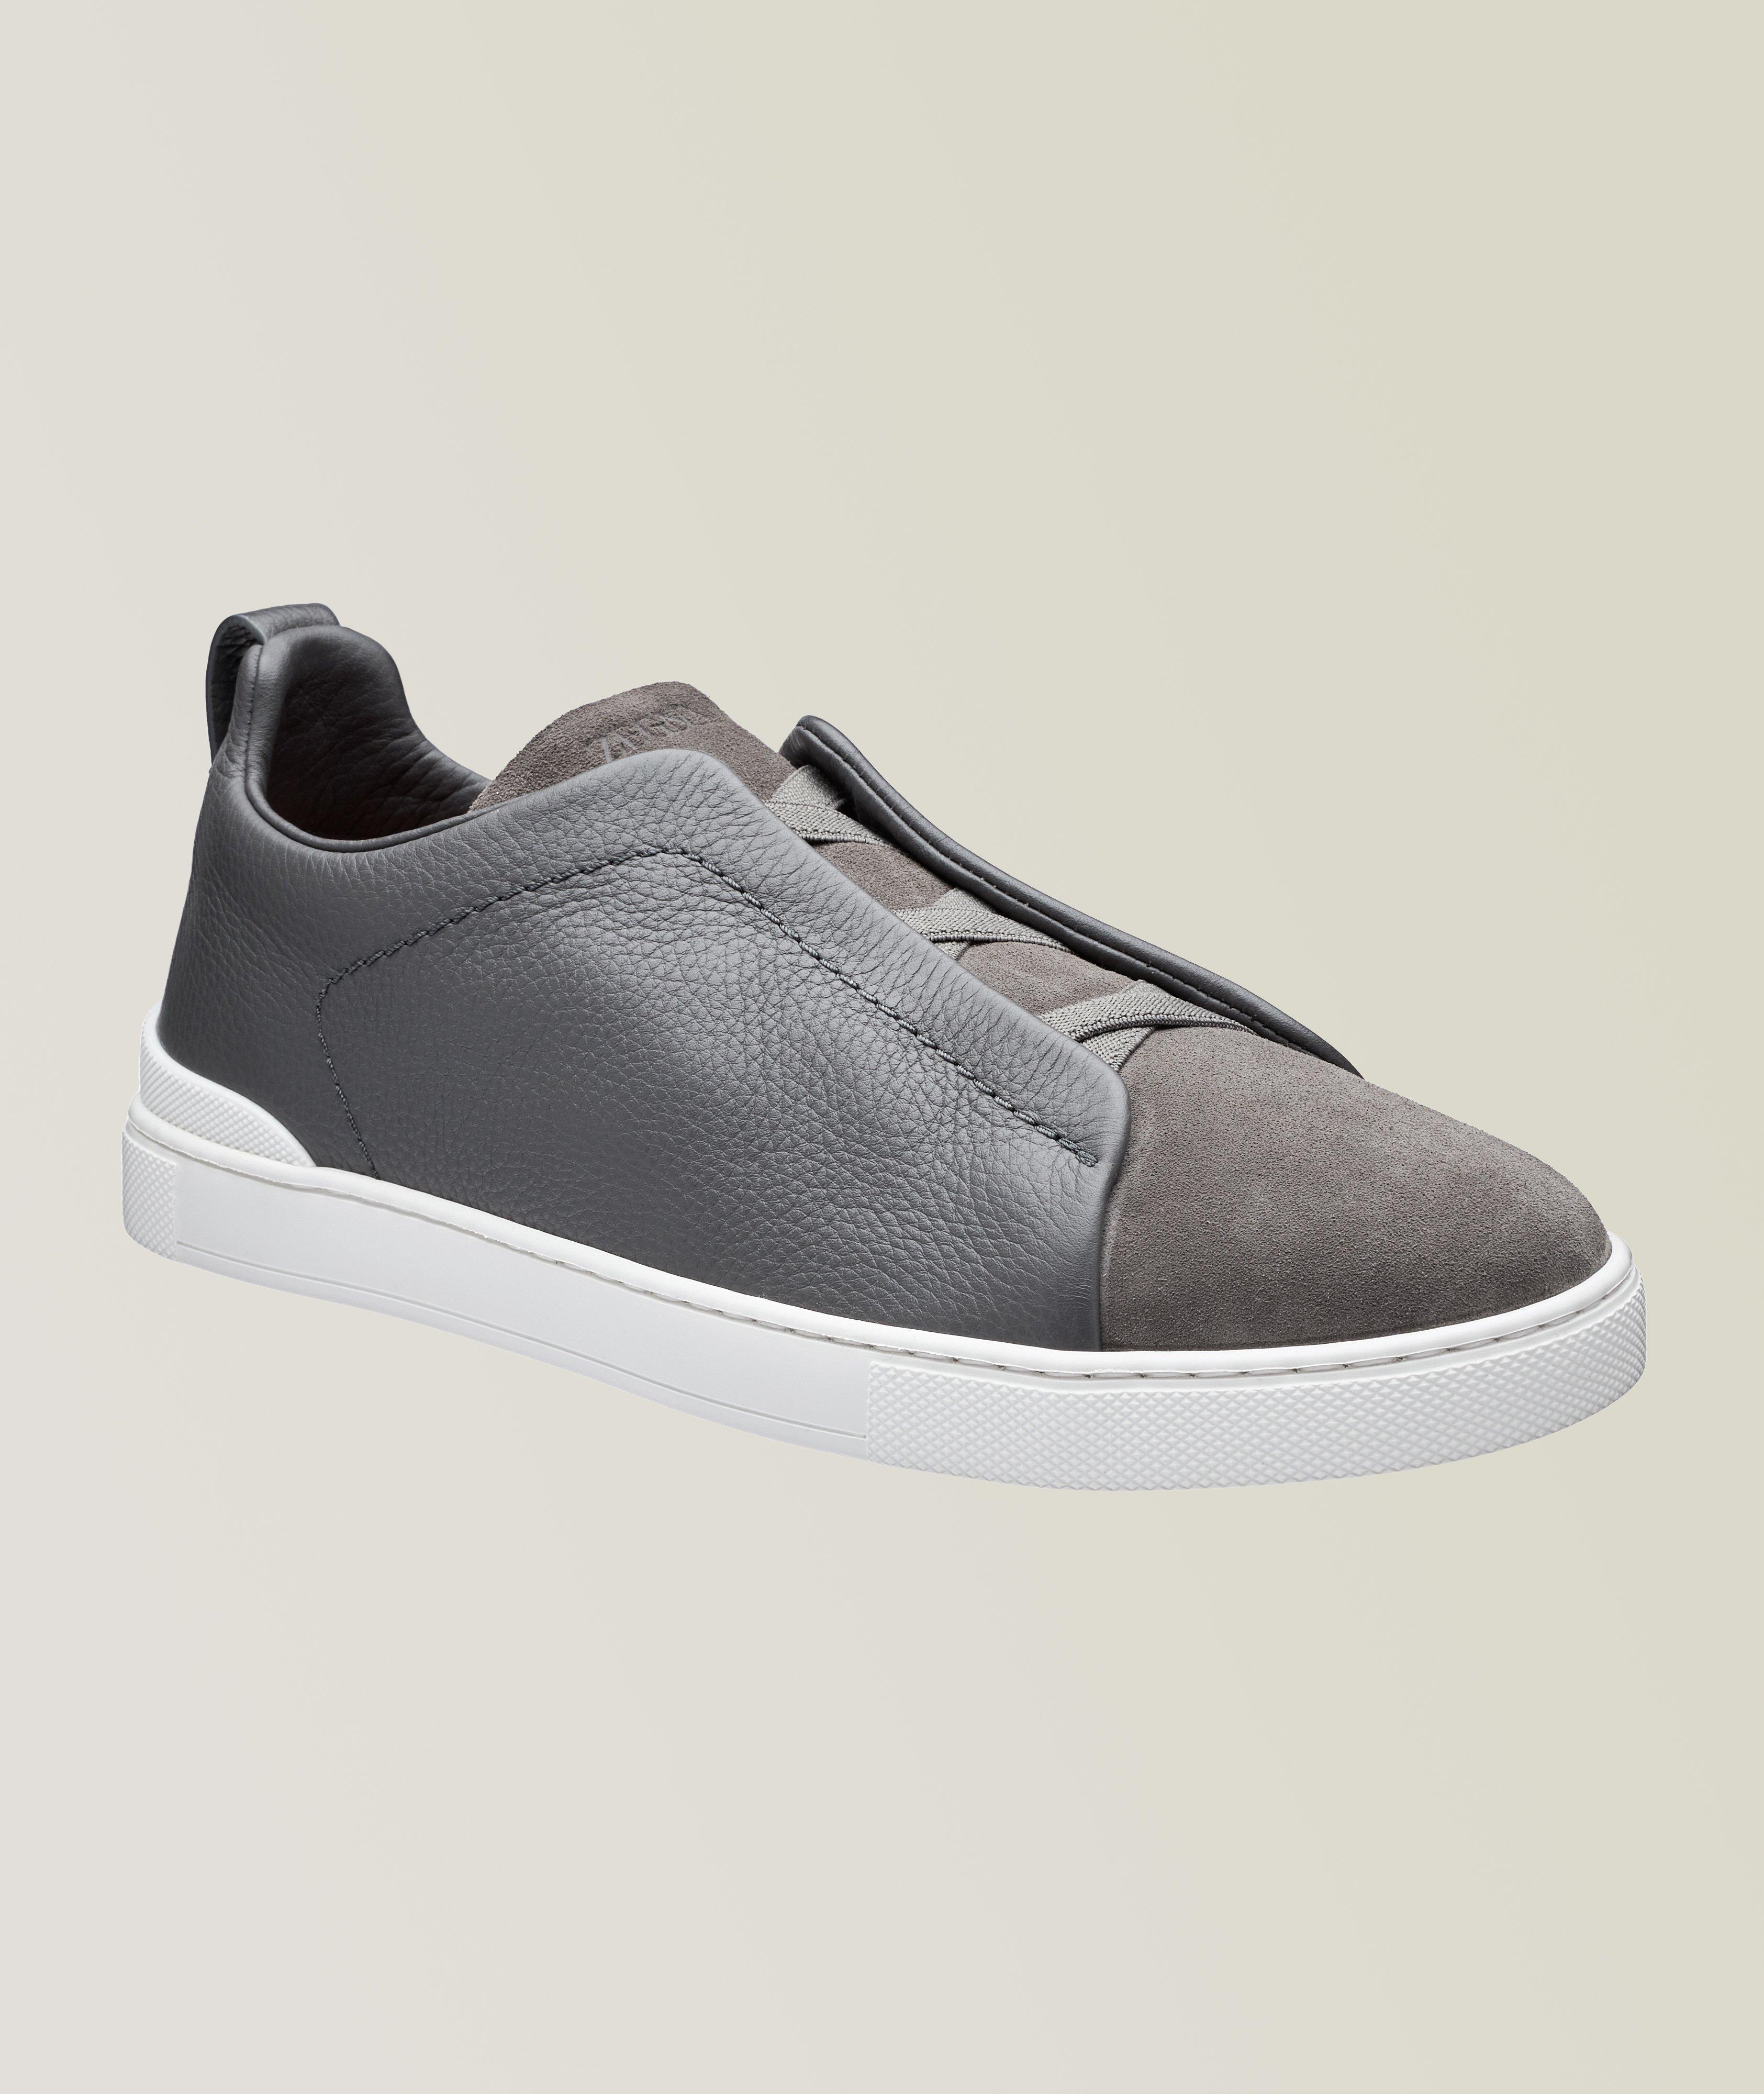 Triple Stitch Suede & Leather Slip-On Sneakers image 0